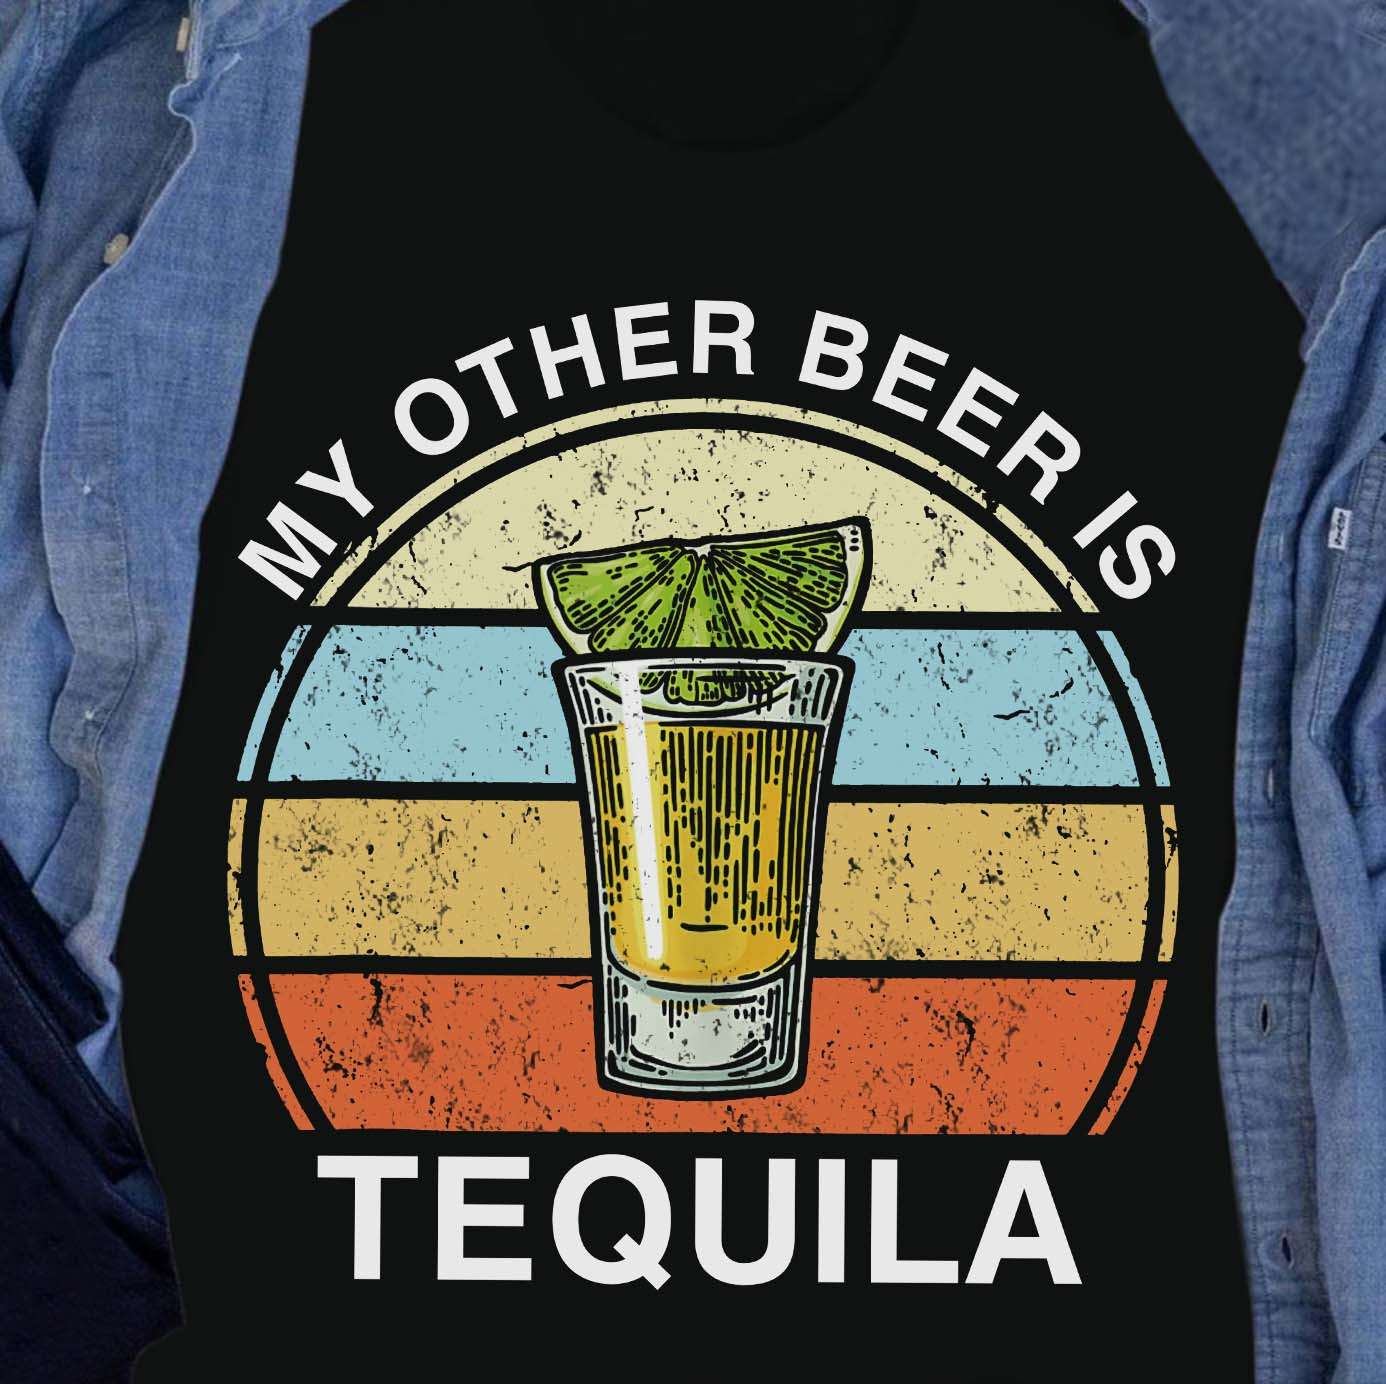 My other beer is tequila - Tequila wine shot, love tequila wine